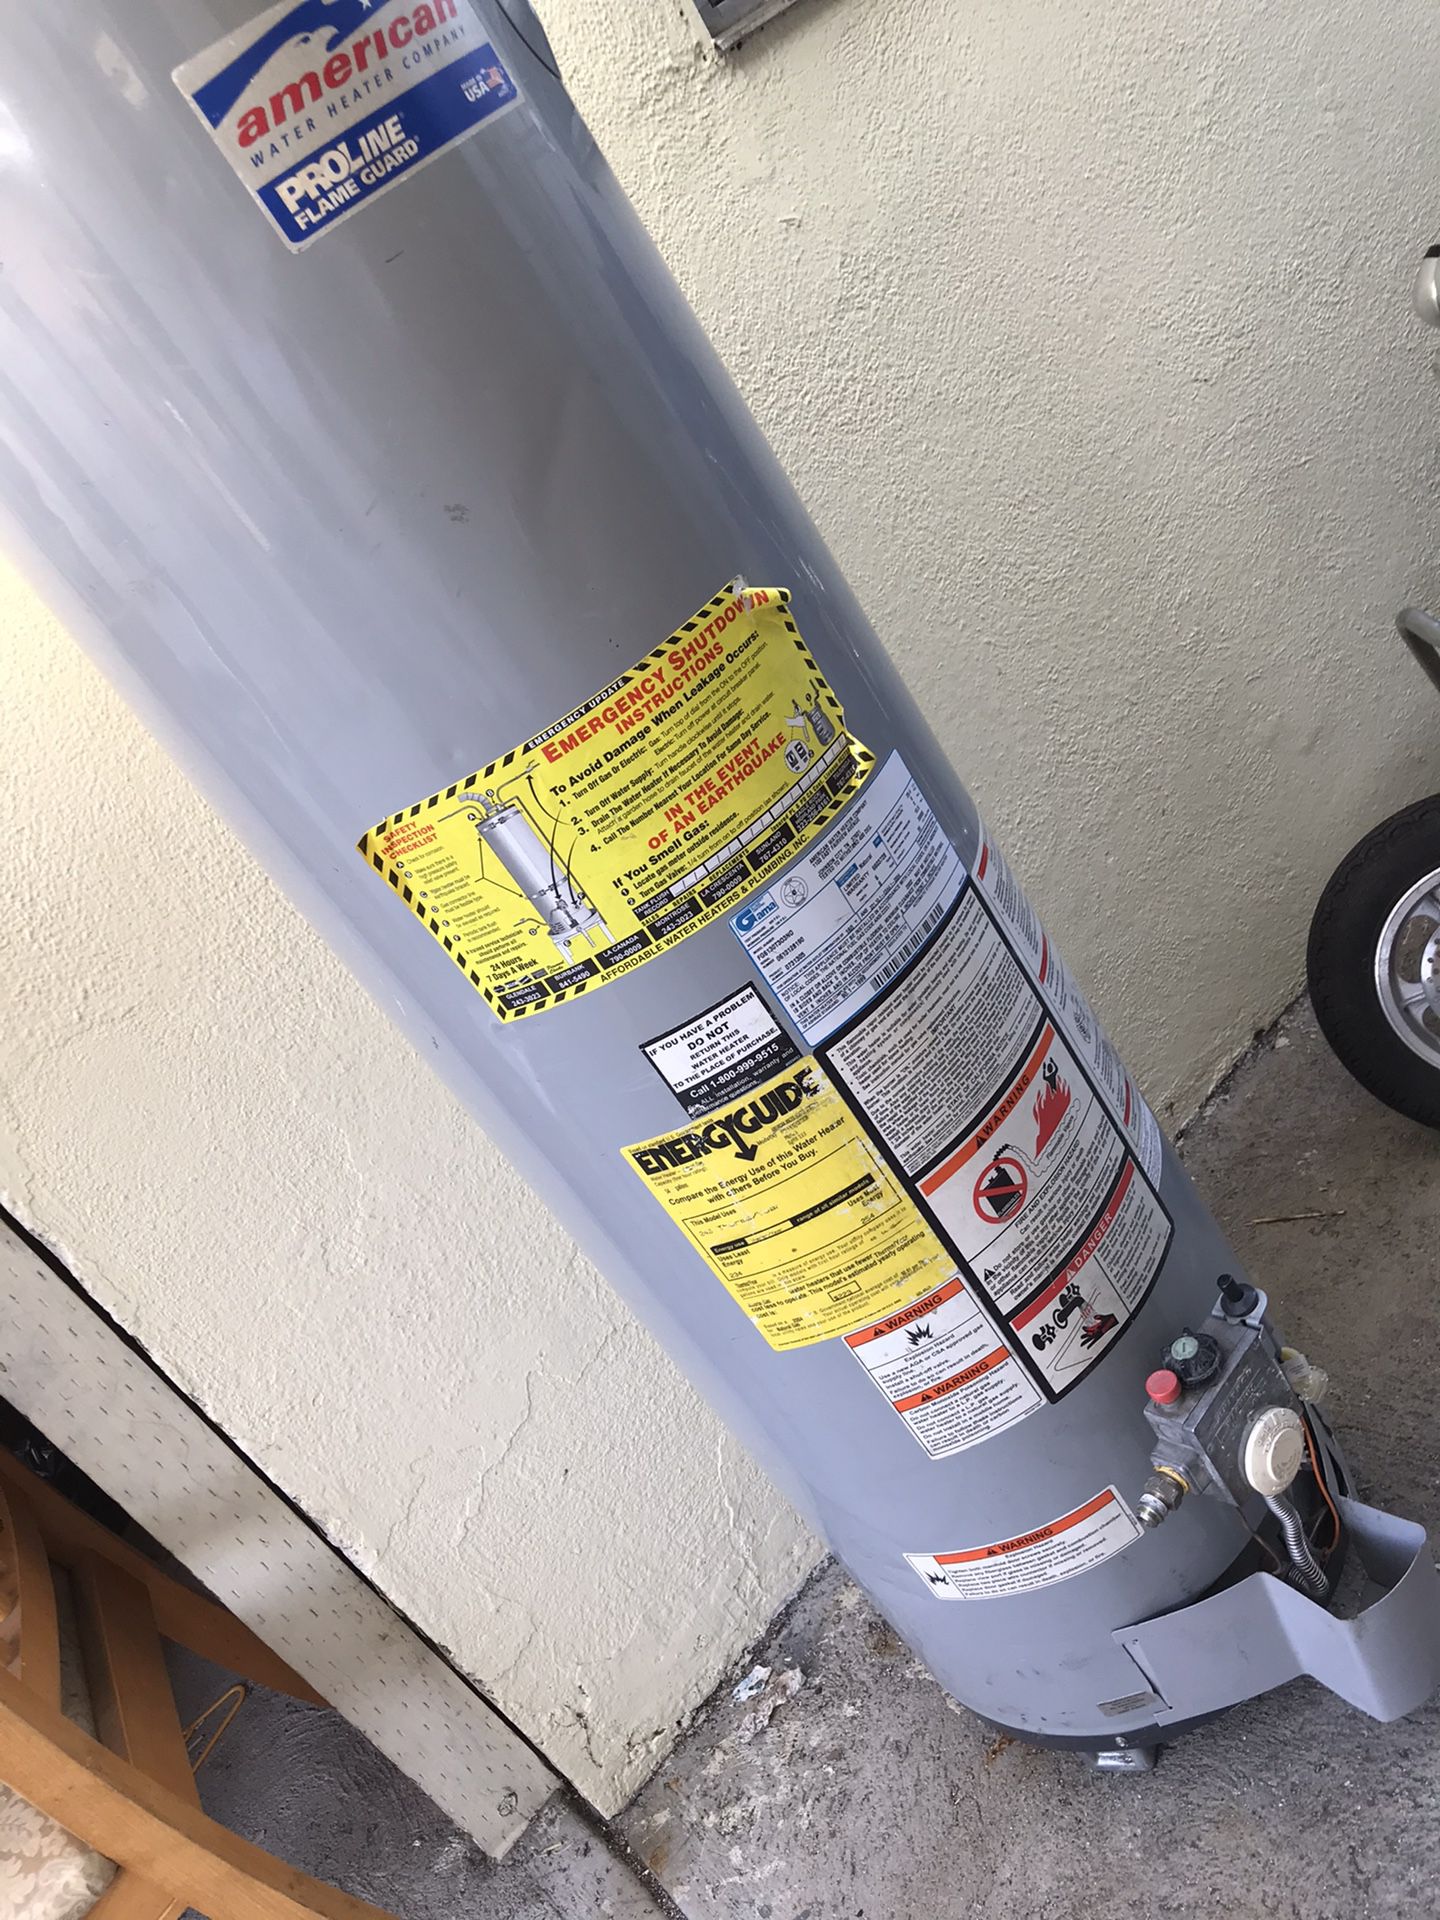 Water heater 30 gallons